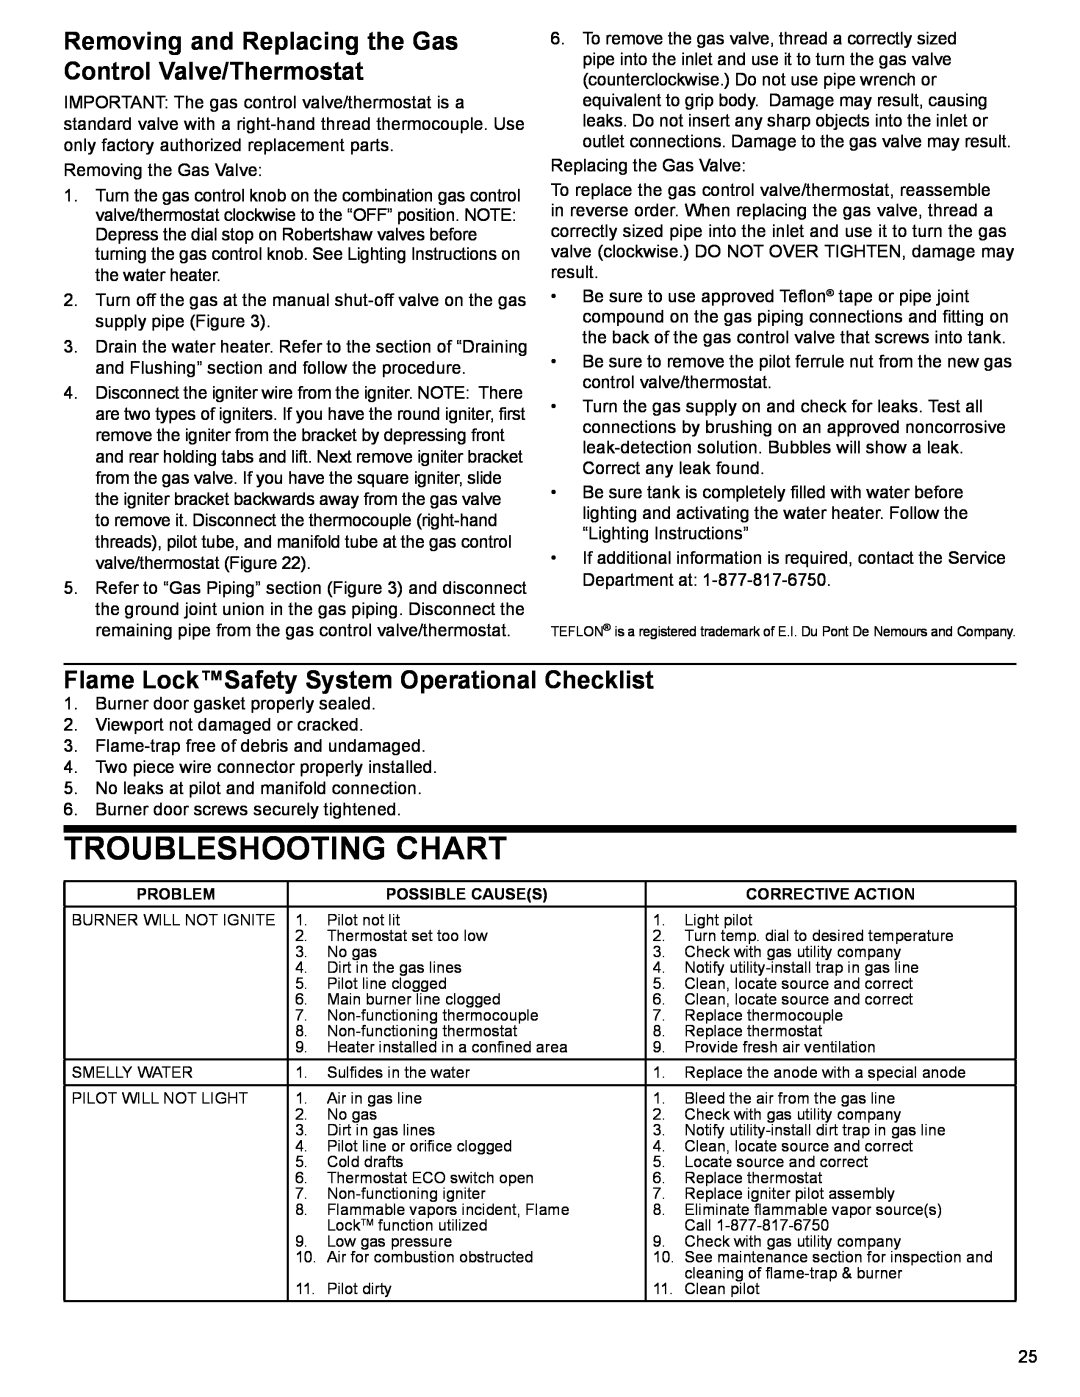 Whirlpool UG1H5040T3NOV, 285258, 285256, 285253, 285255 Troubleshooting Chart, Flame LockSafety System Operational Checklist 